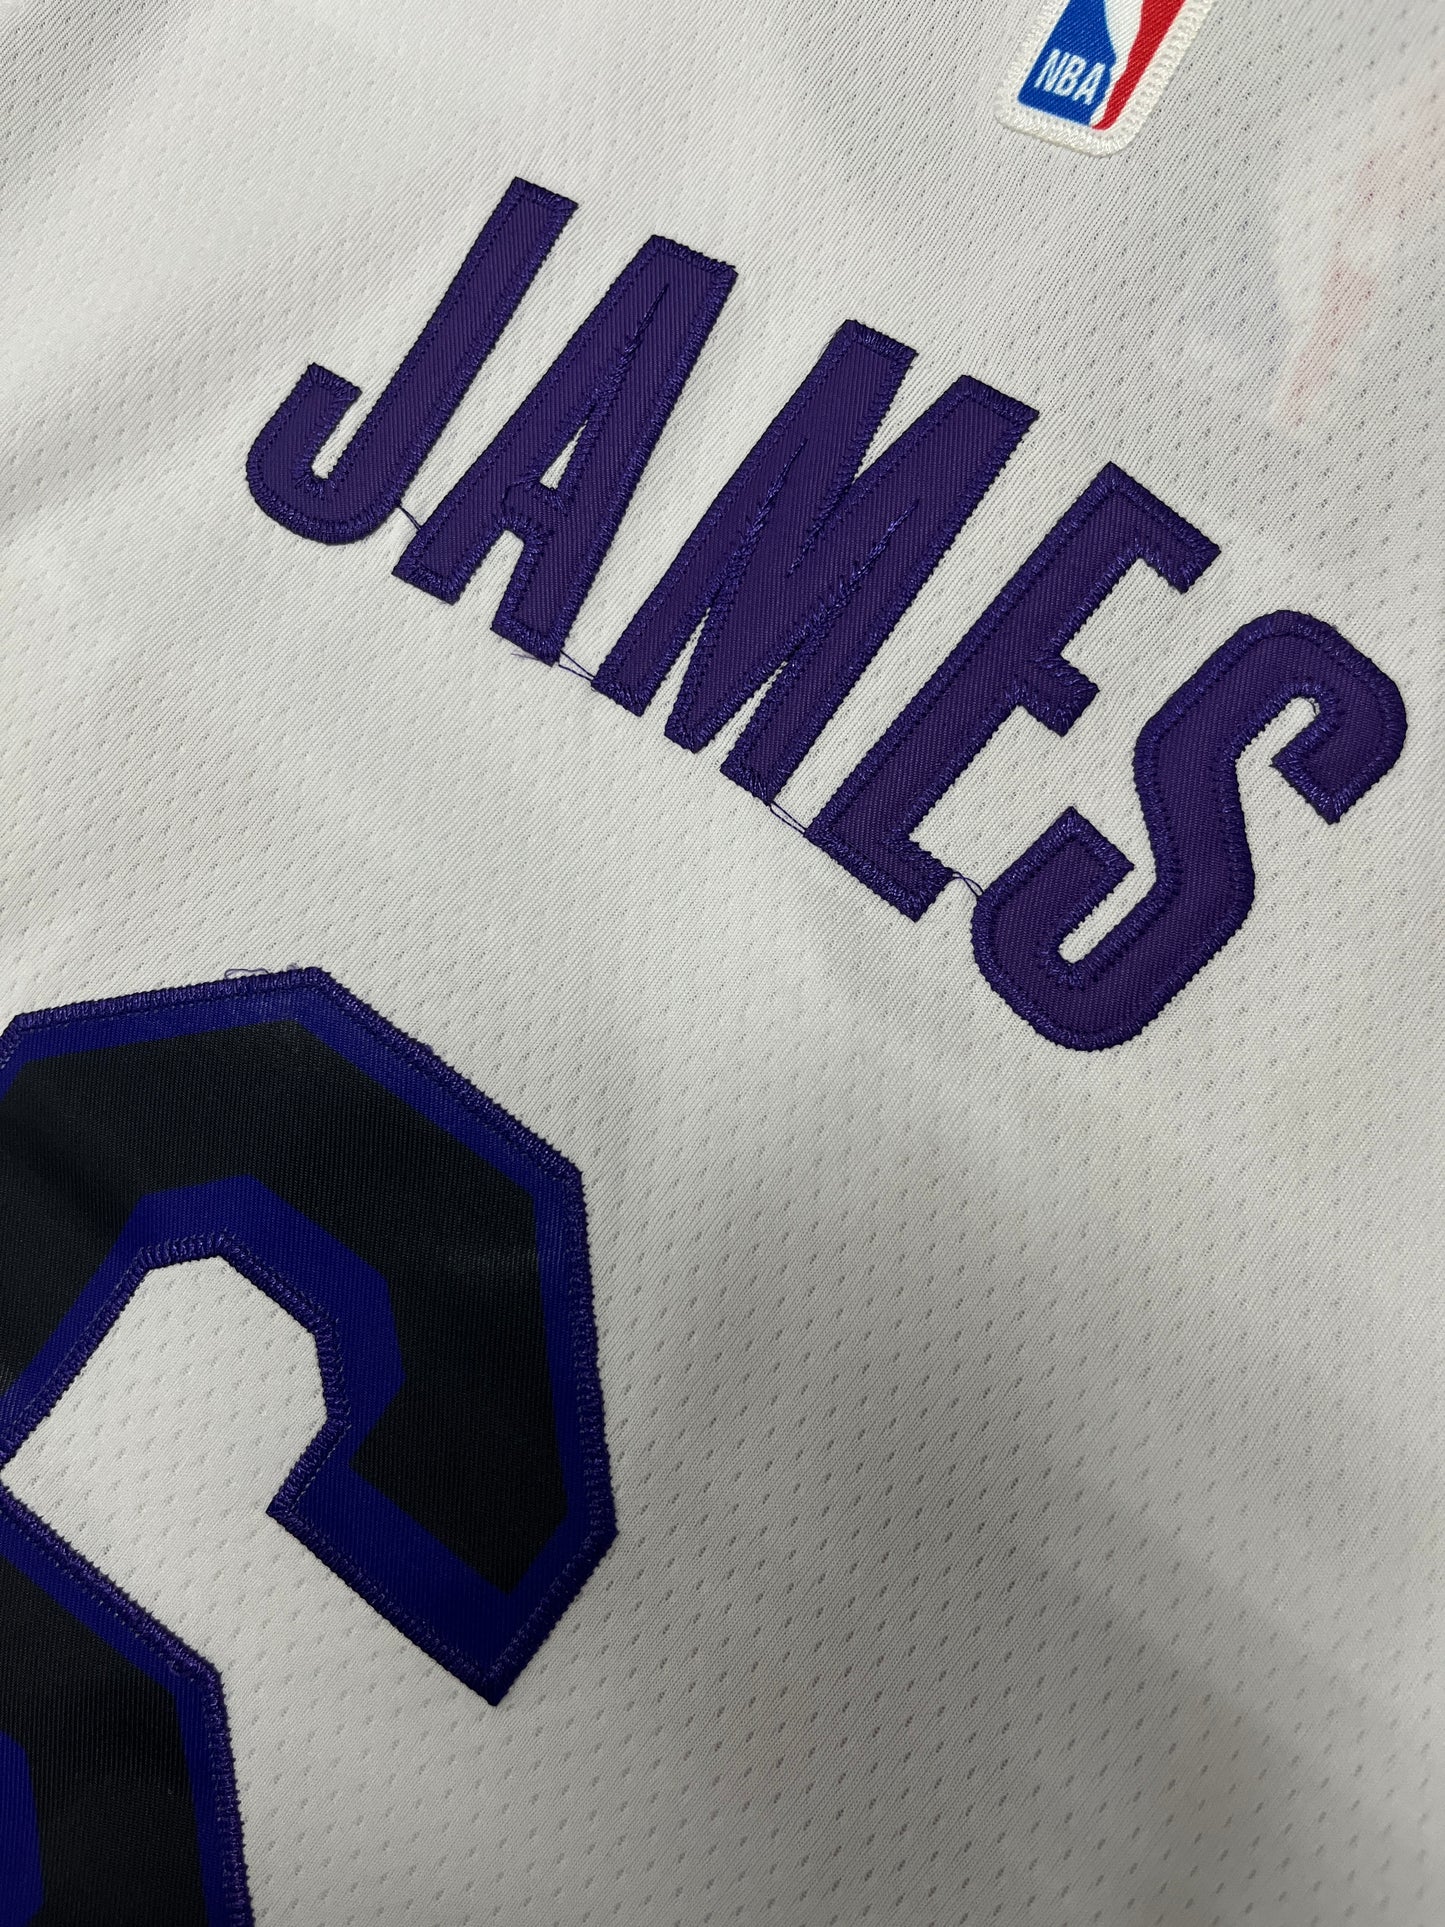 JAMES 6 White Los Angeles Lakers NBA Jersey